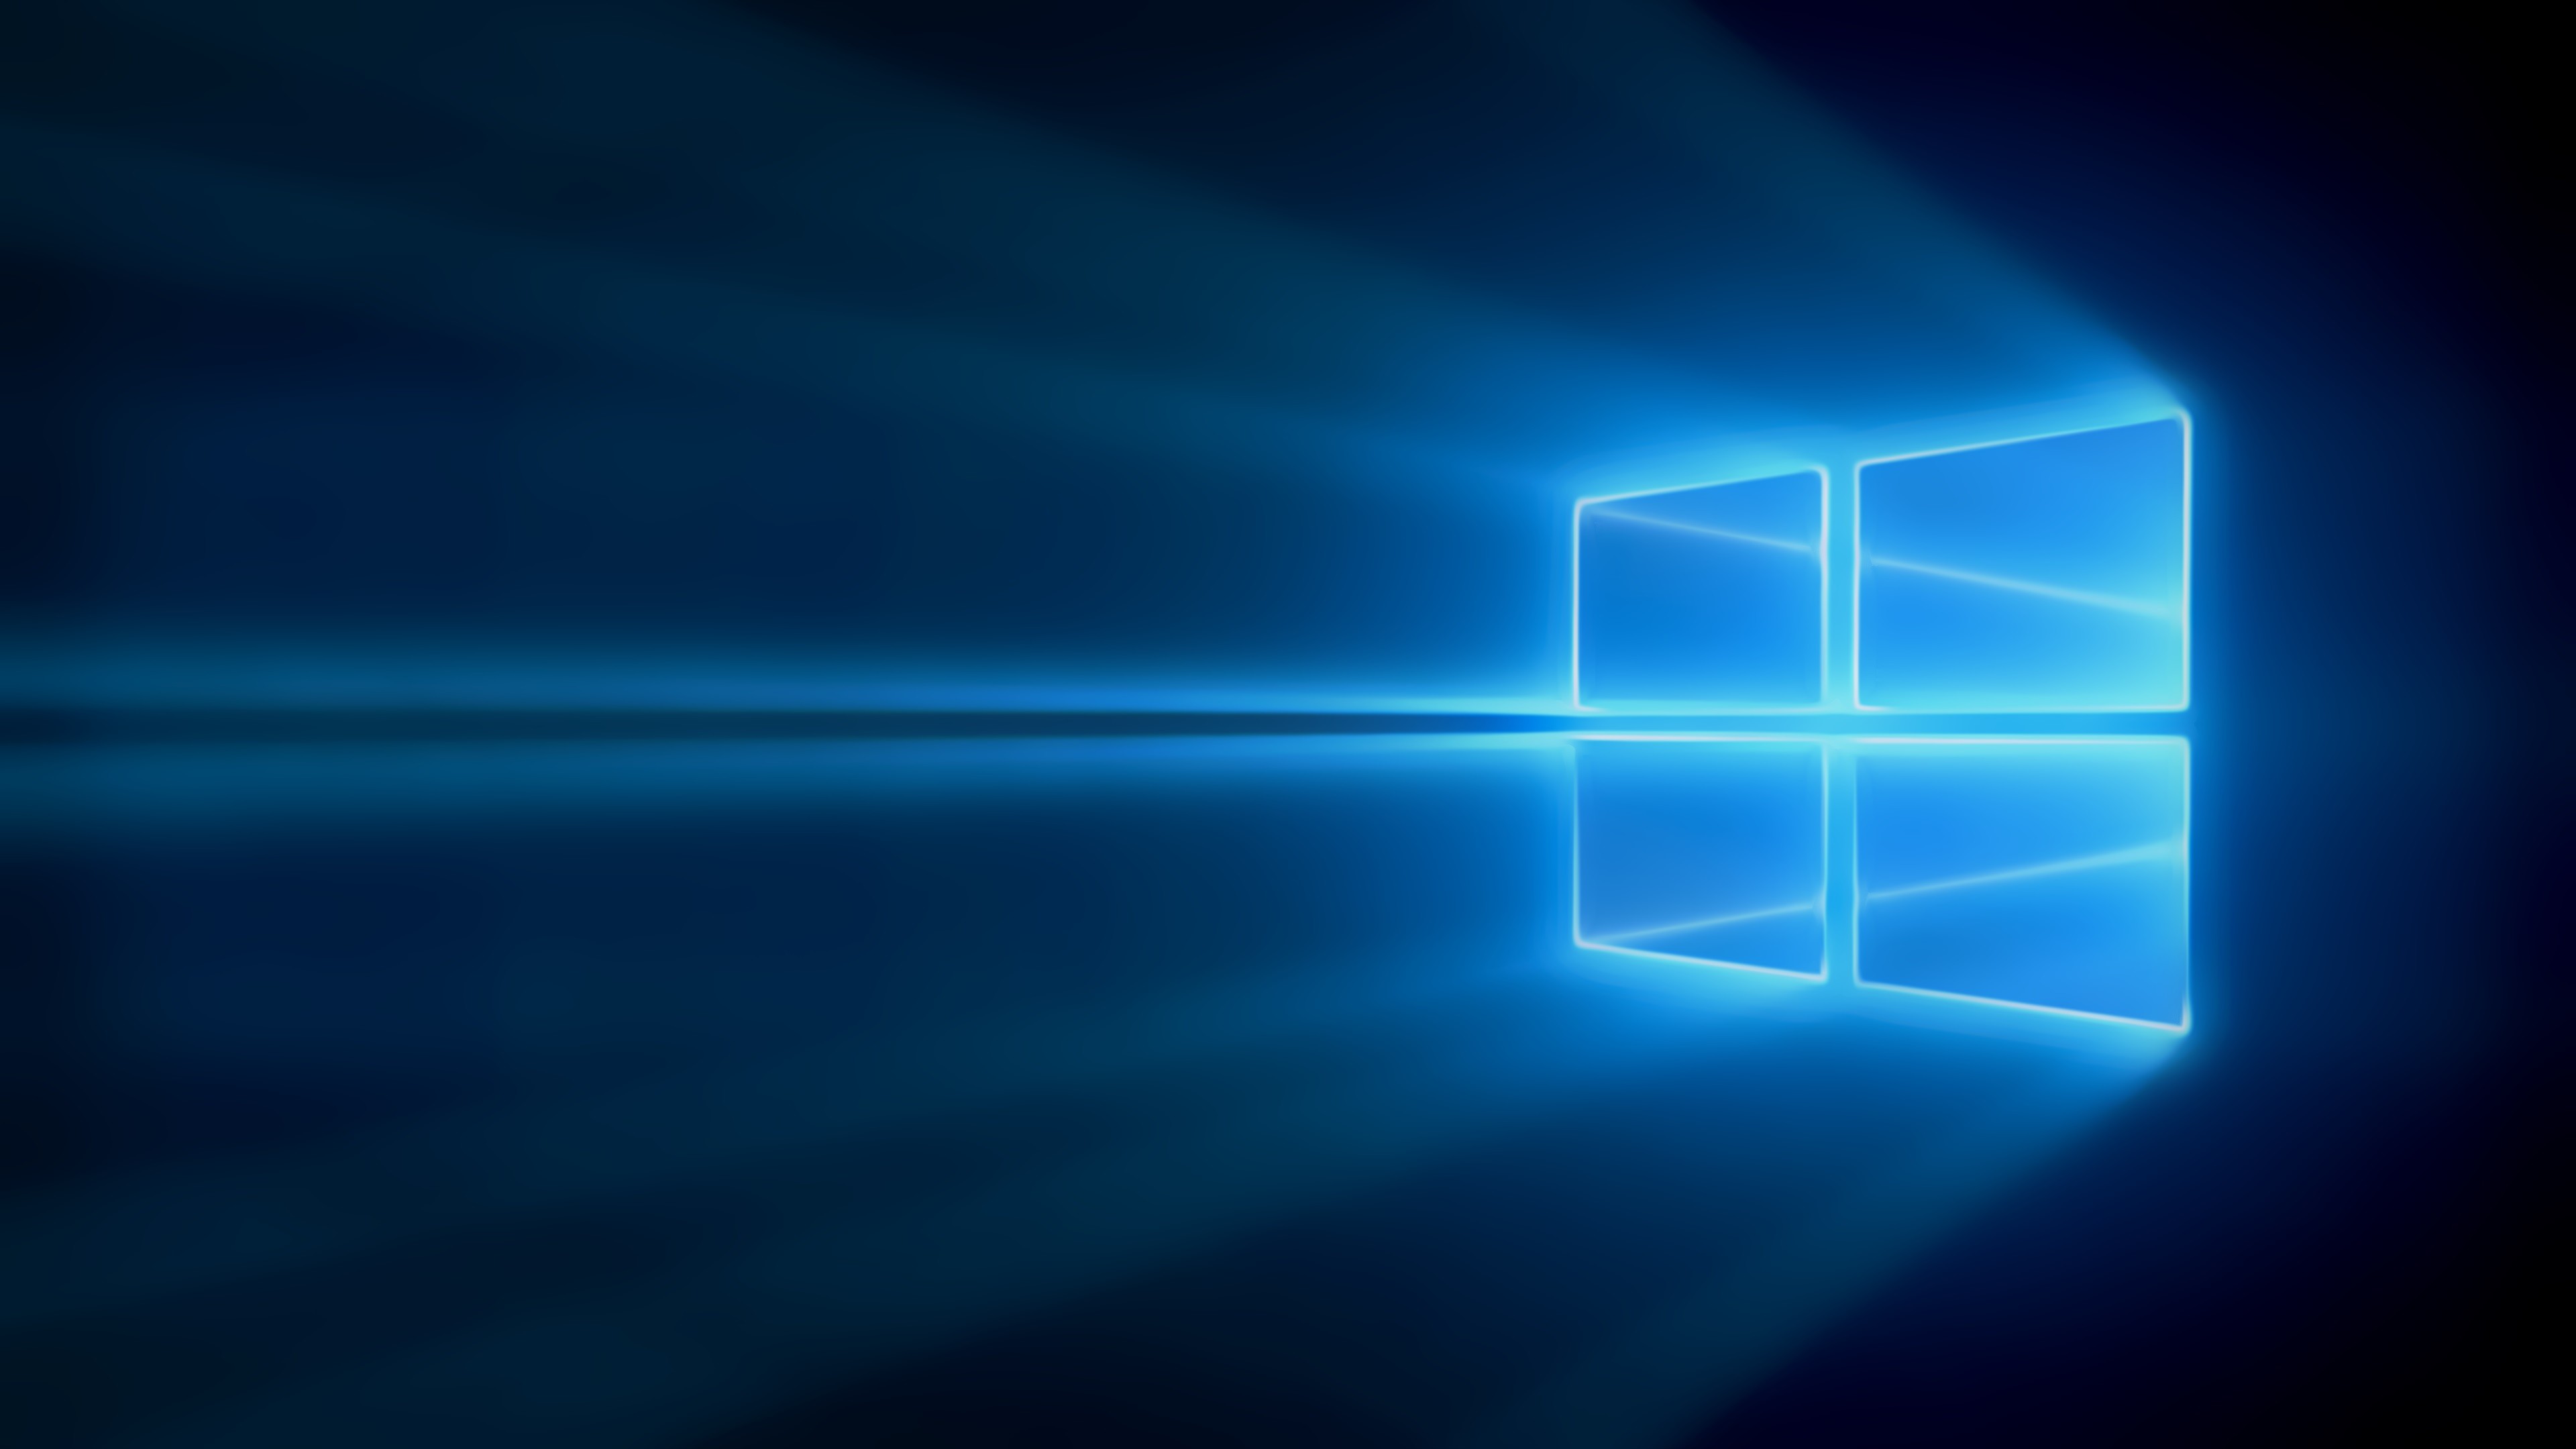 Windows Awesome Full HD Wallpaper